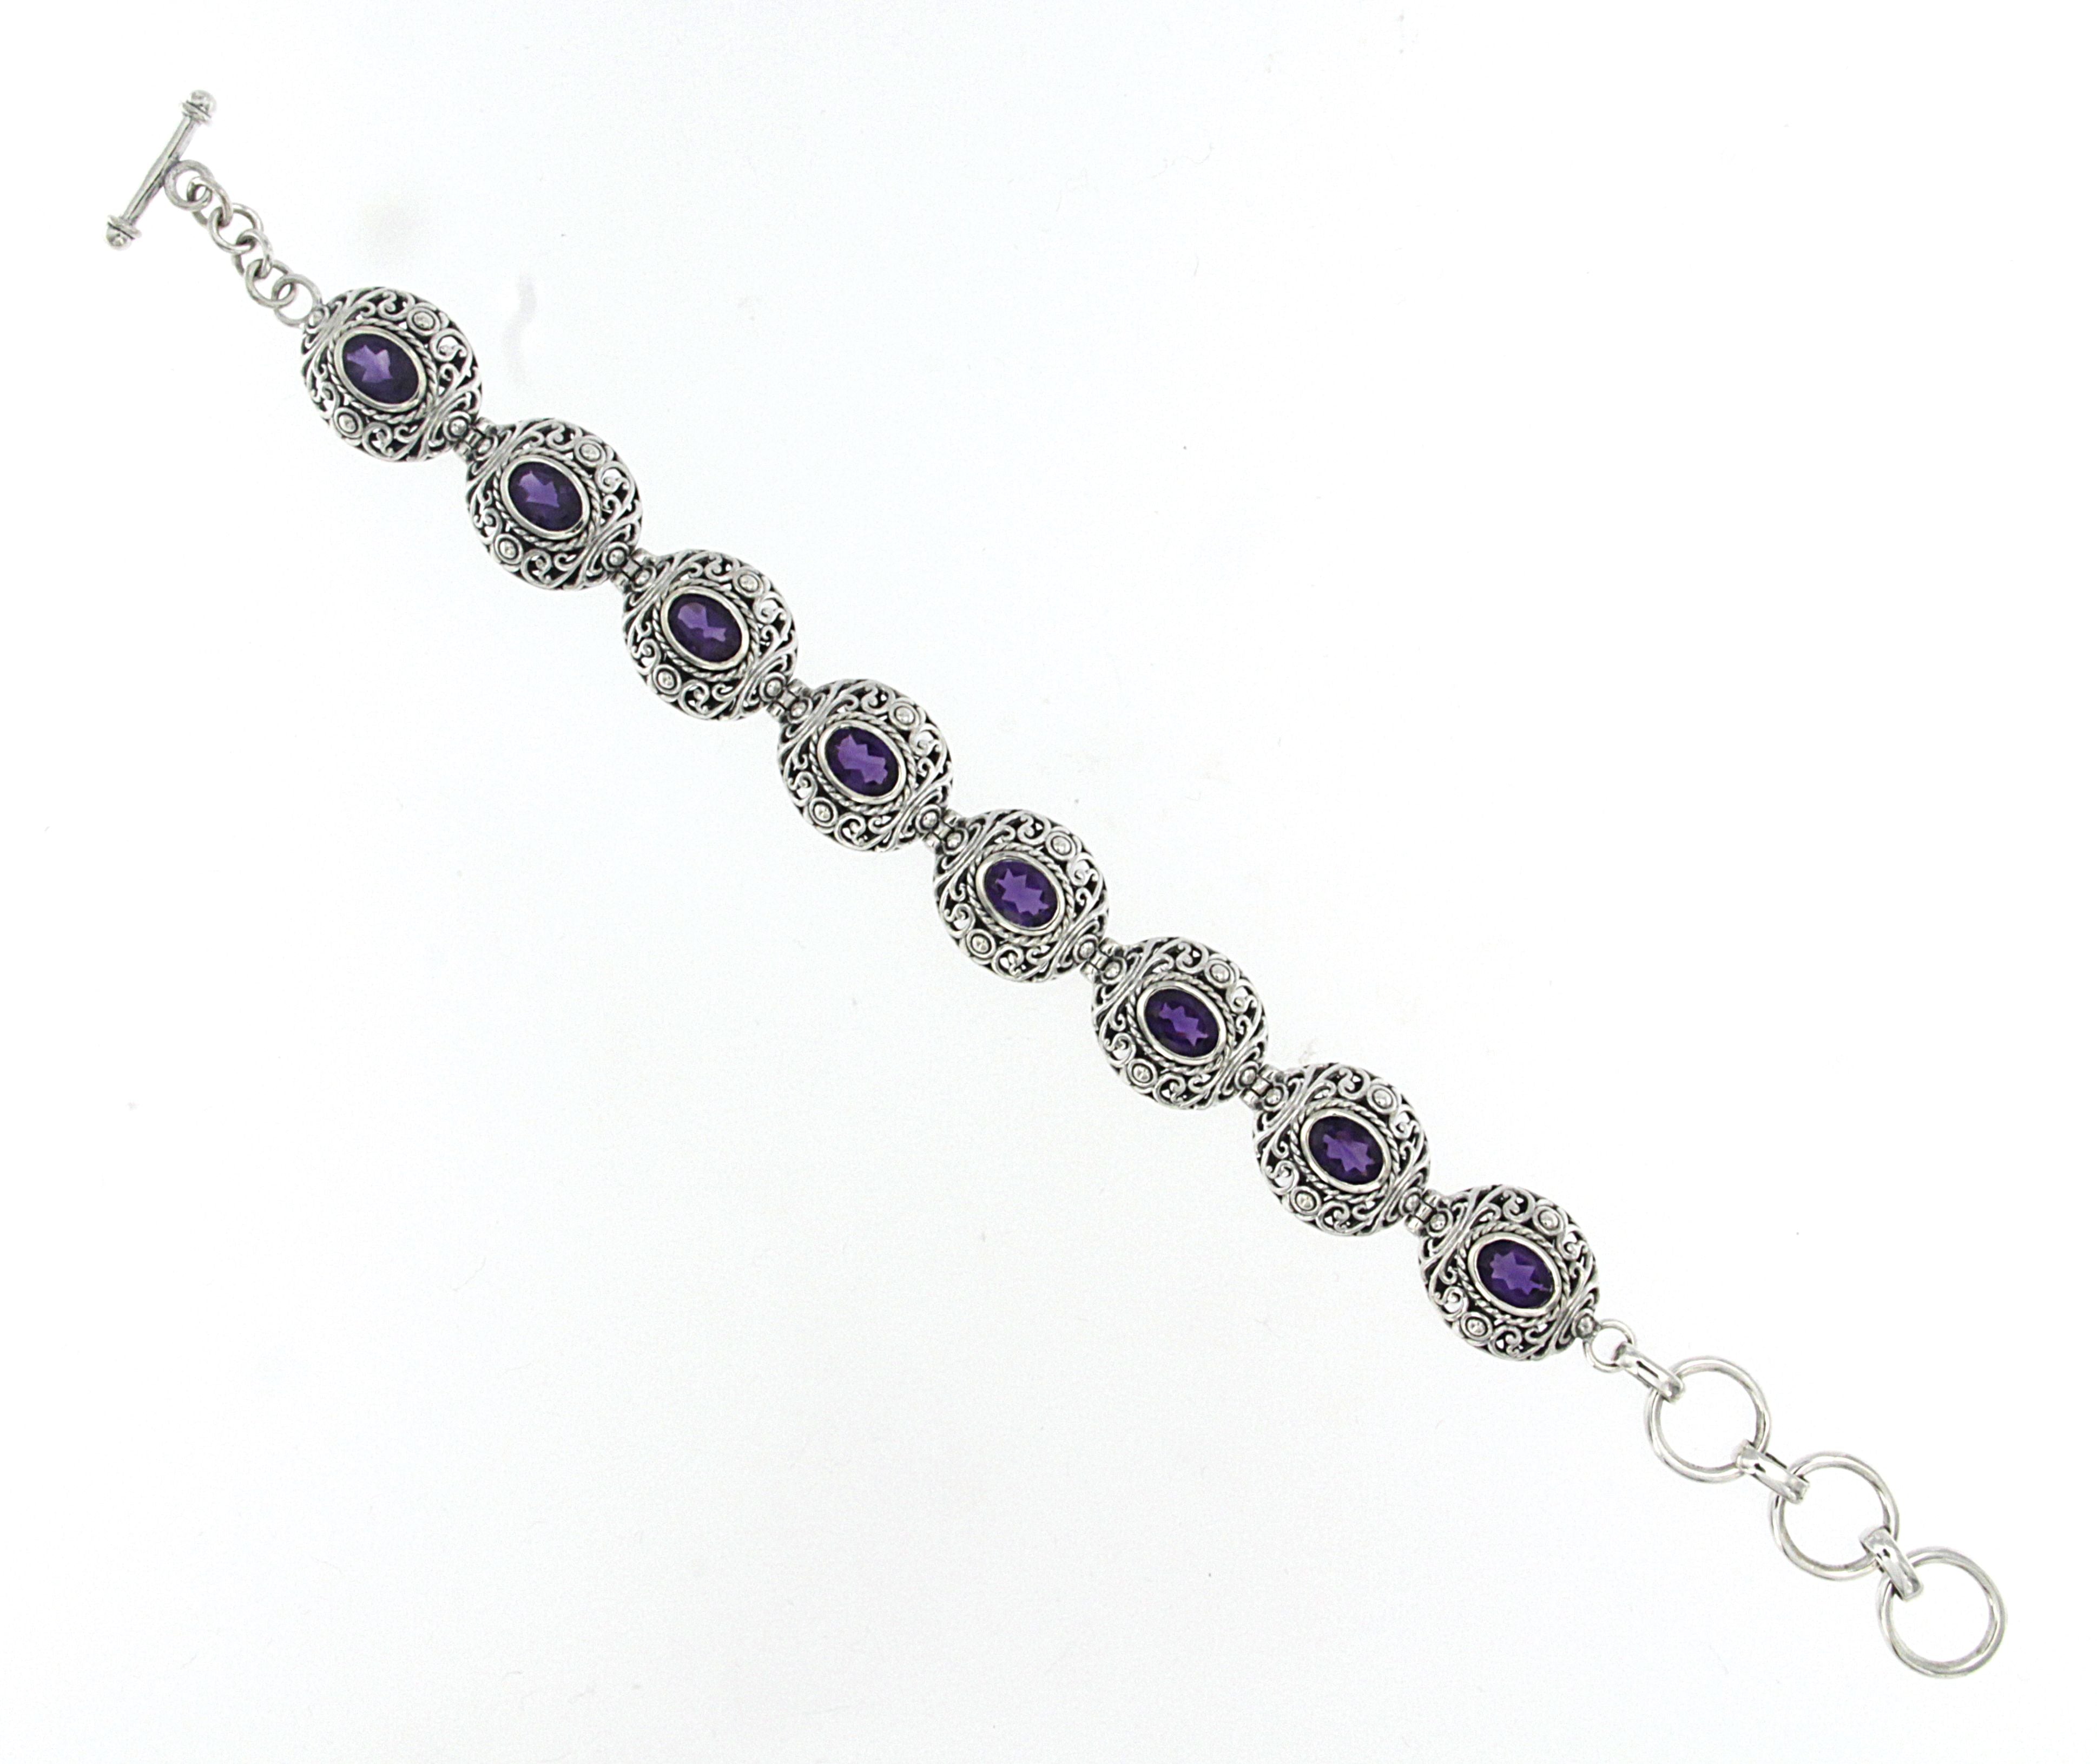 Samuel B. Sterling Silver Balinese Design Amethyst Bracelet, 6.5" with 1" extender. Our Sterling Silver amethyst station bracelet, handcrafted in Bali by our skilled artisans. From our signature collection, Royal Bali™ featuring designs handcrafted using sterling silver  and genuine gemstones. The February birthstone, Amethyst, is said to strengthen relationships and give its wearer courage. At one time, only royalty could wear the gem.